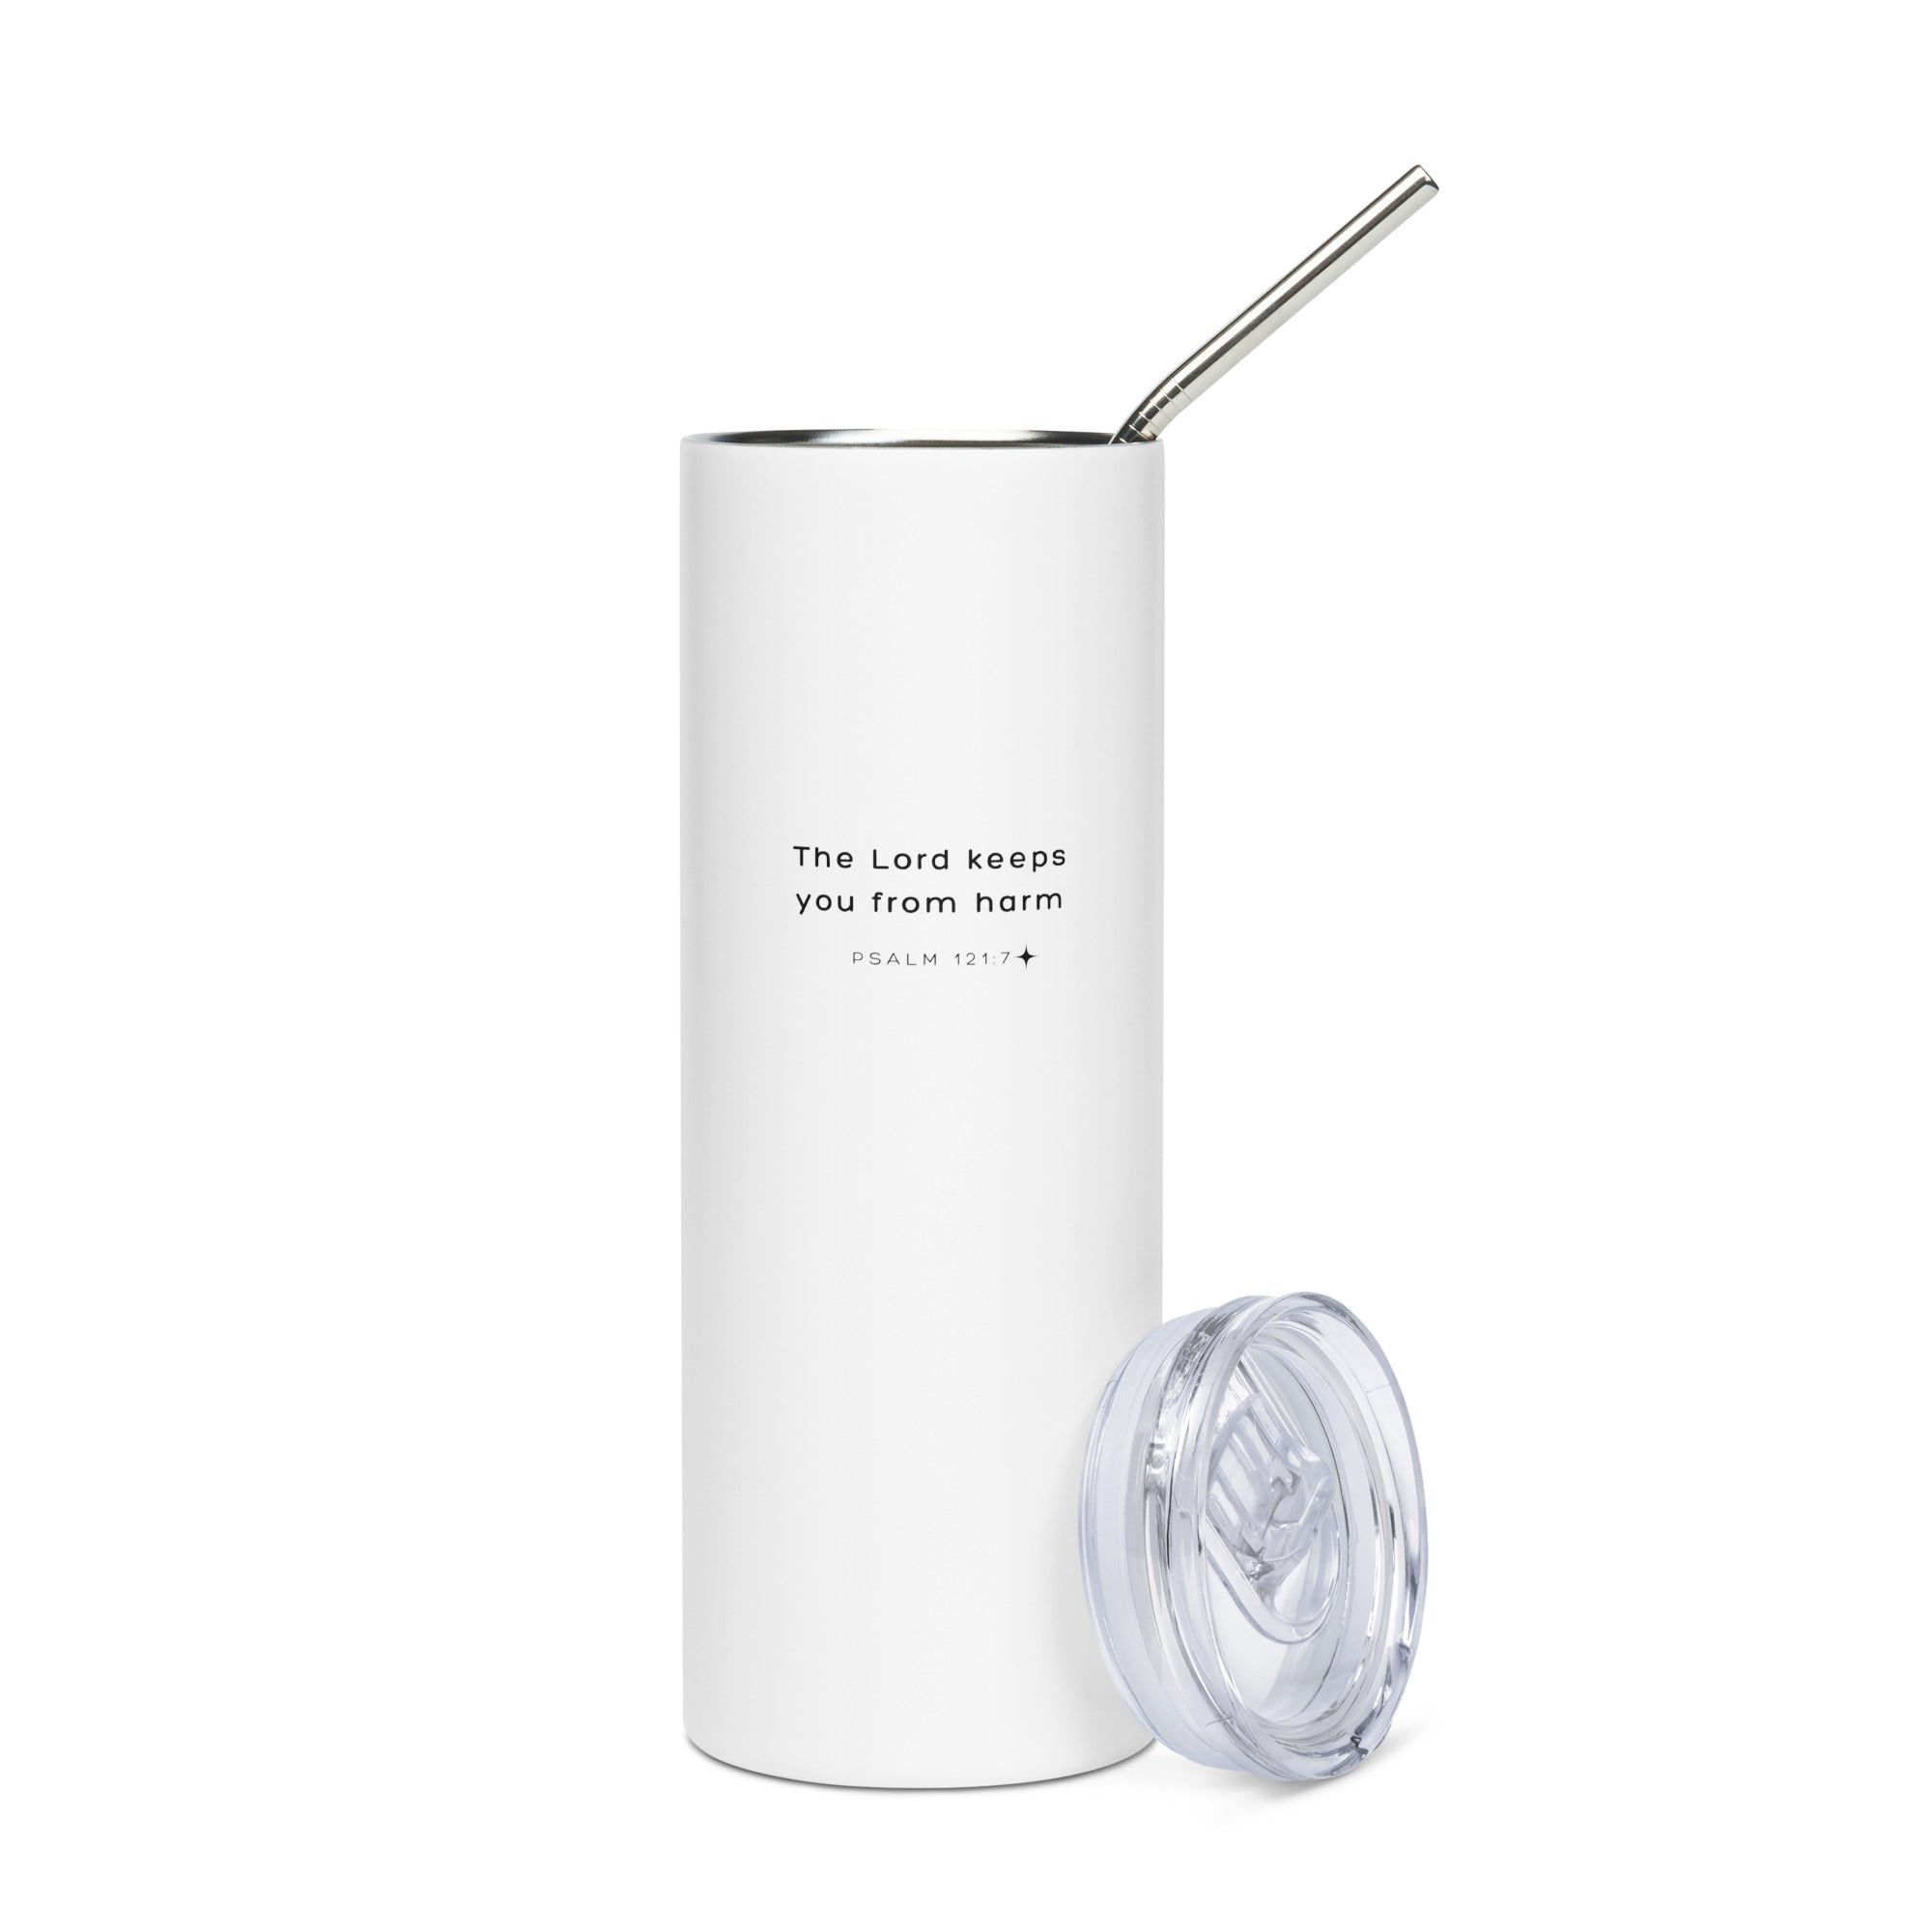 Stainless steel tumbler - Psalm 121:7